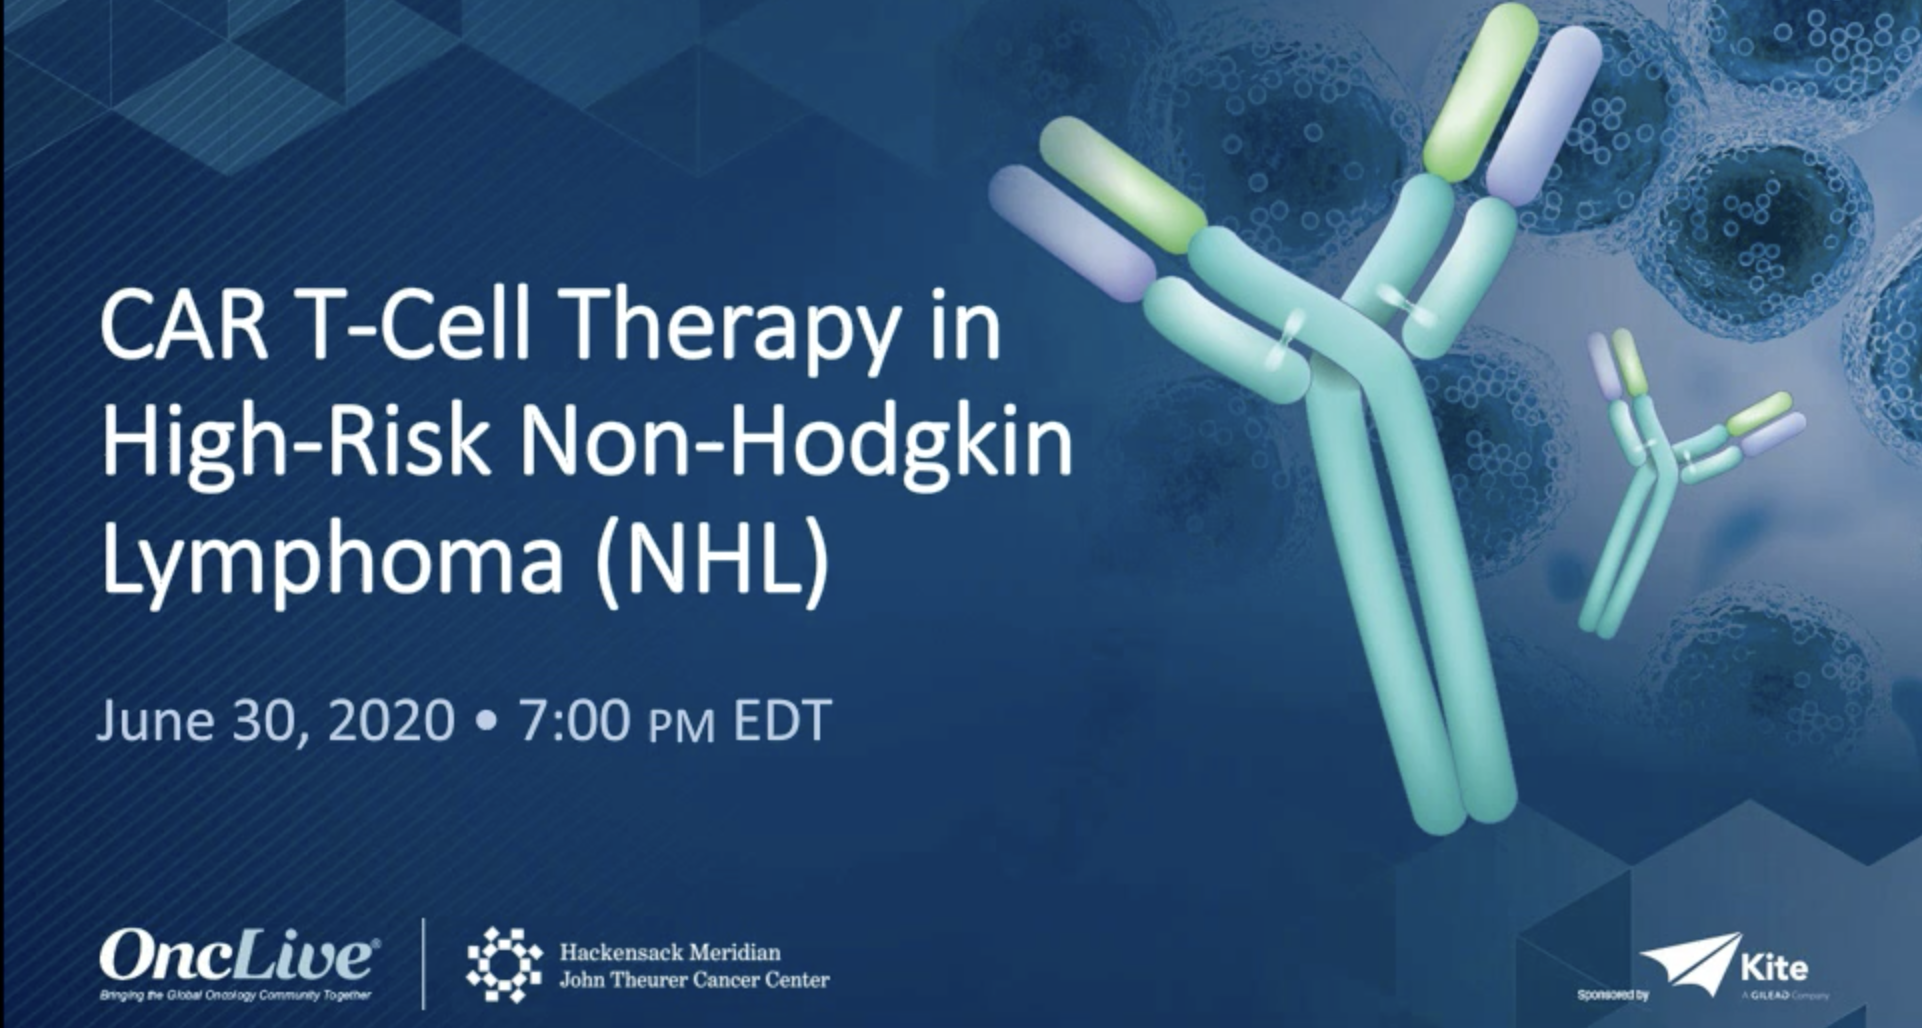  CAR T-Cell Therapy in High-Risk Non-Hodgkin Lymphoma